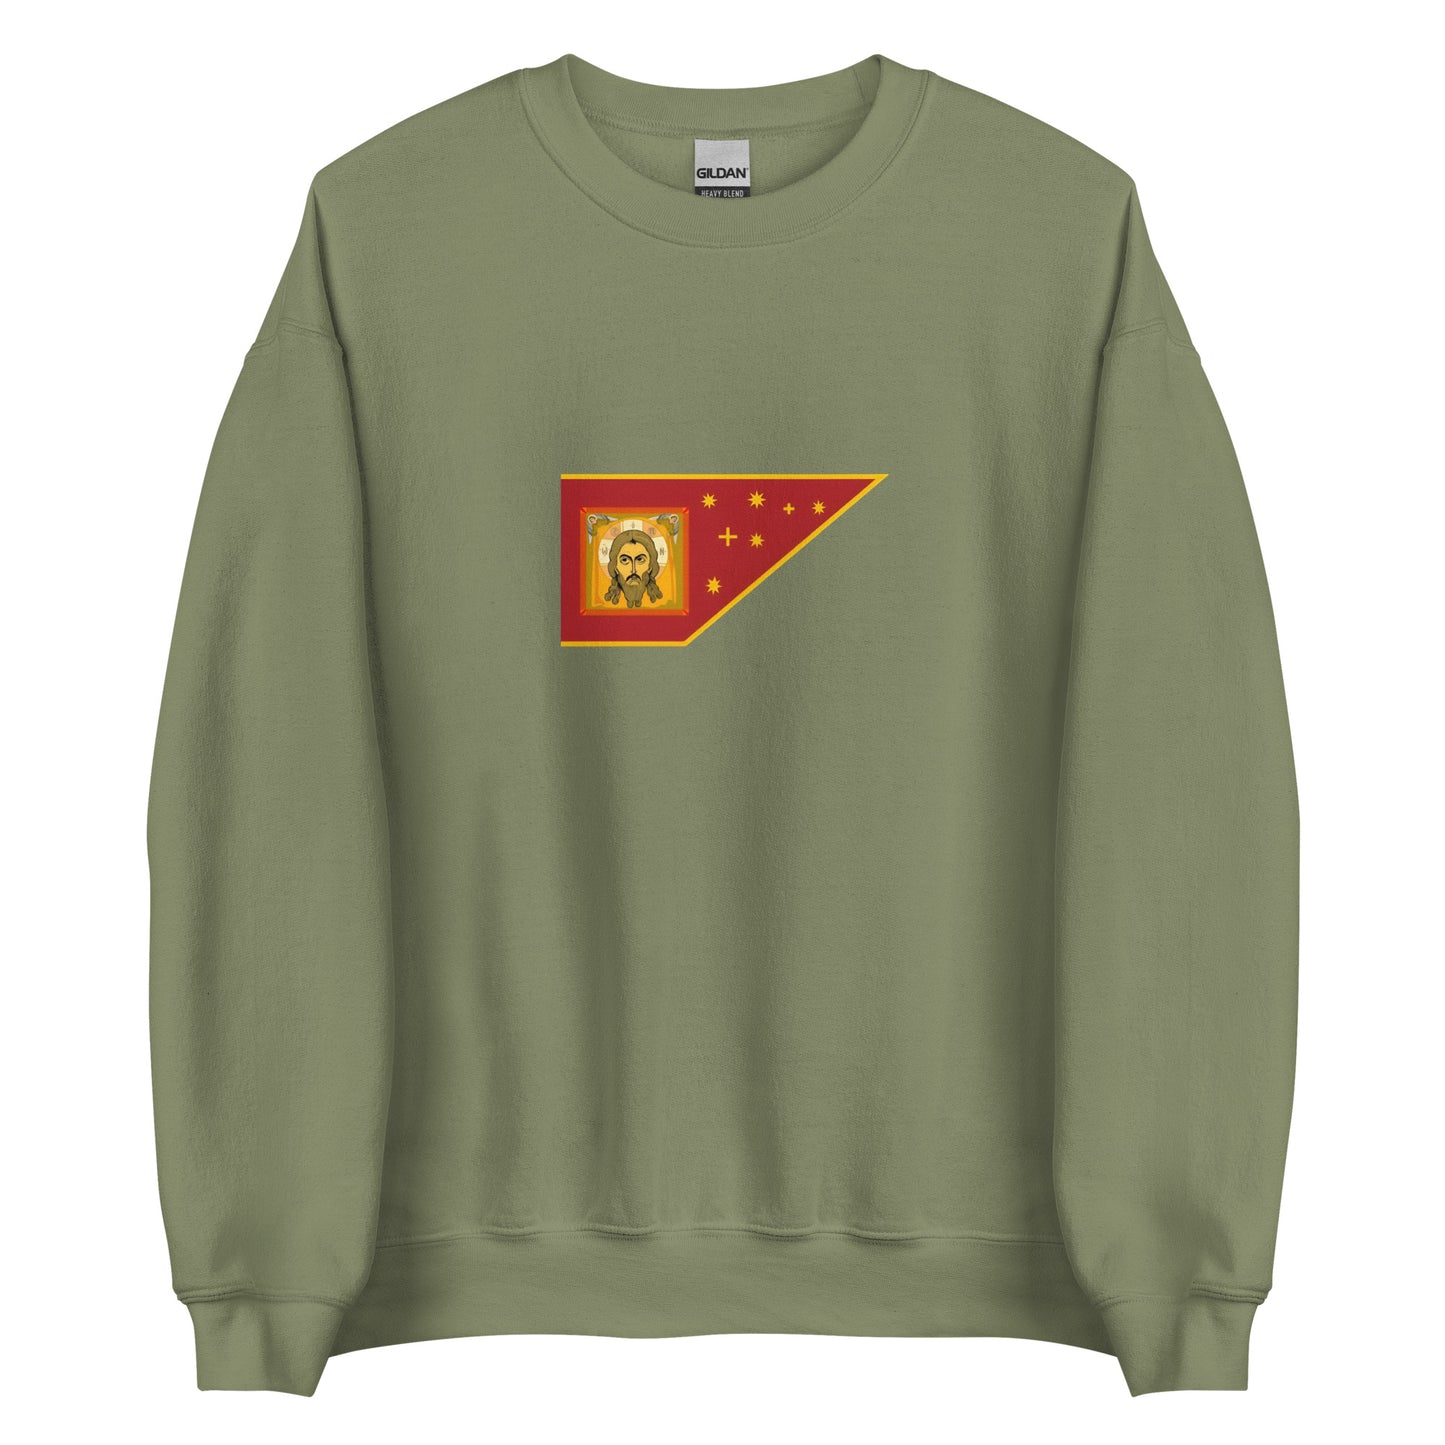 Russia - Grand Duchy of Moscow (1263-1547) | Russian Flag Interactive History Sweatshirt